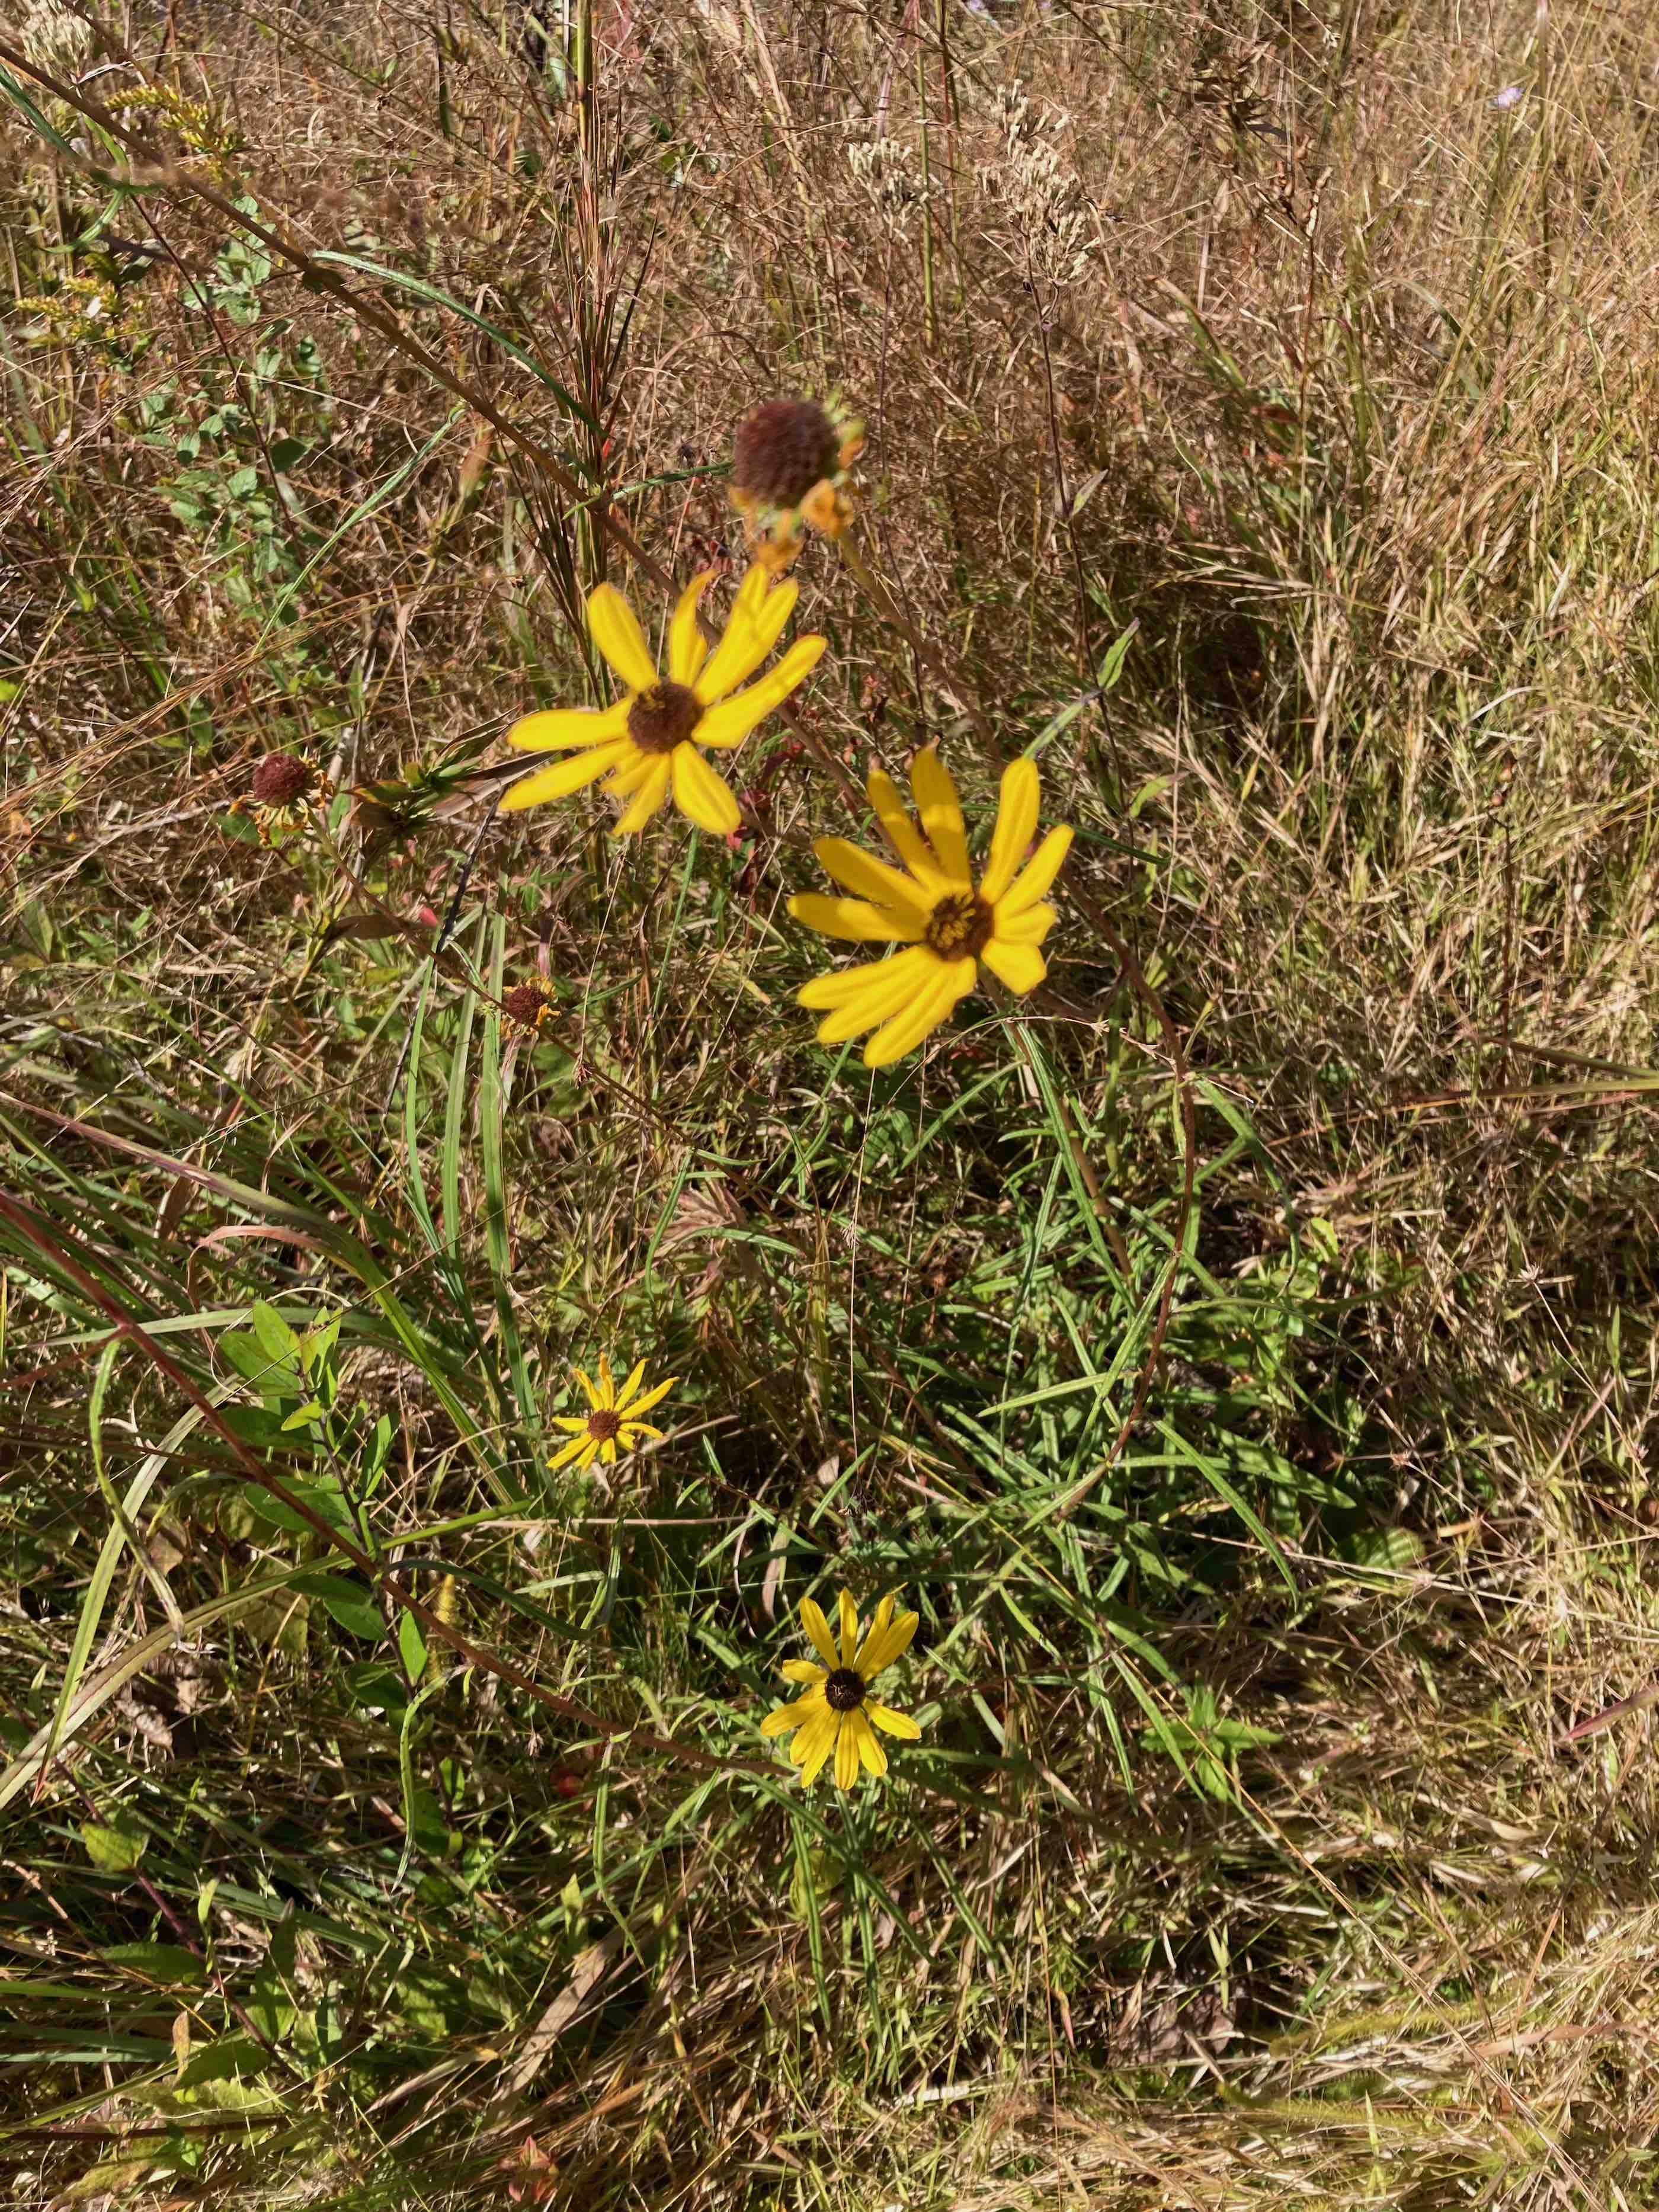 The Scientific Name is Helianthus angustifolius. You will likely hear them called Narrowleaf Sunflower, Swamp Sunflower. This picture shows the Leaves are very narrow, scabrous, and their margins curl inward. of Helianthus angustifolius